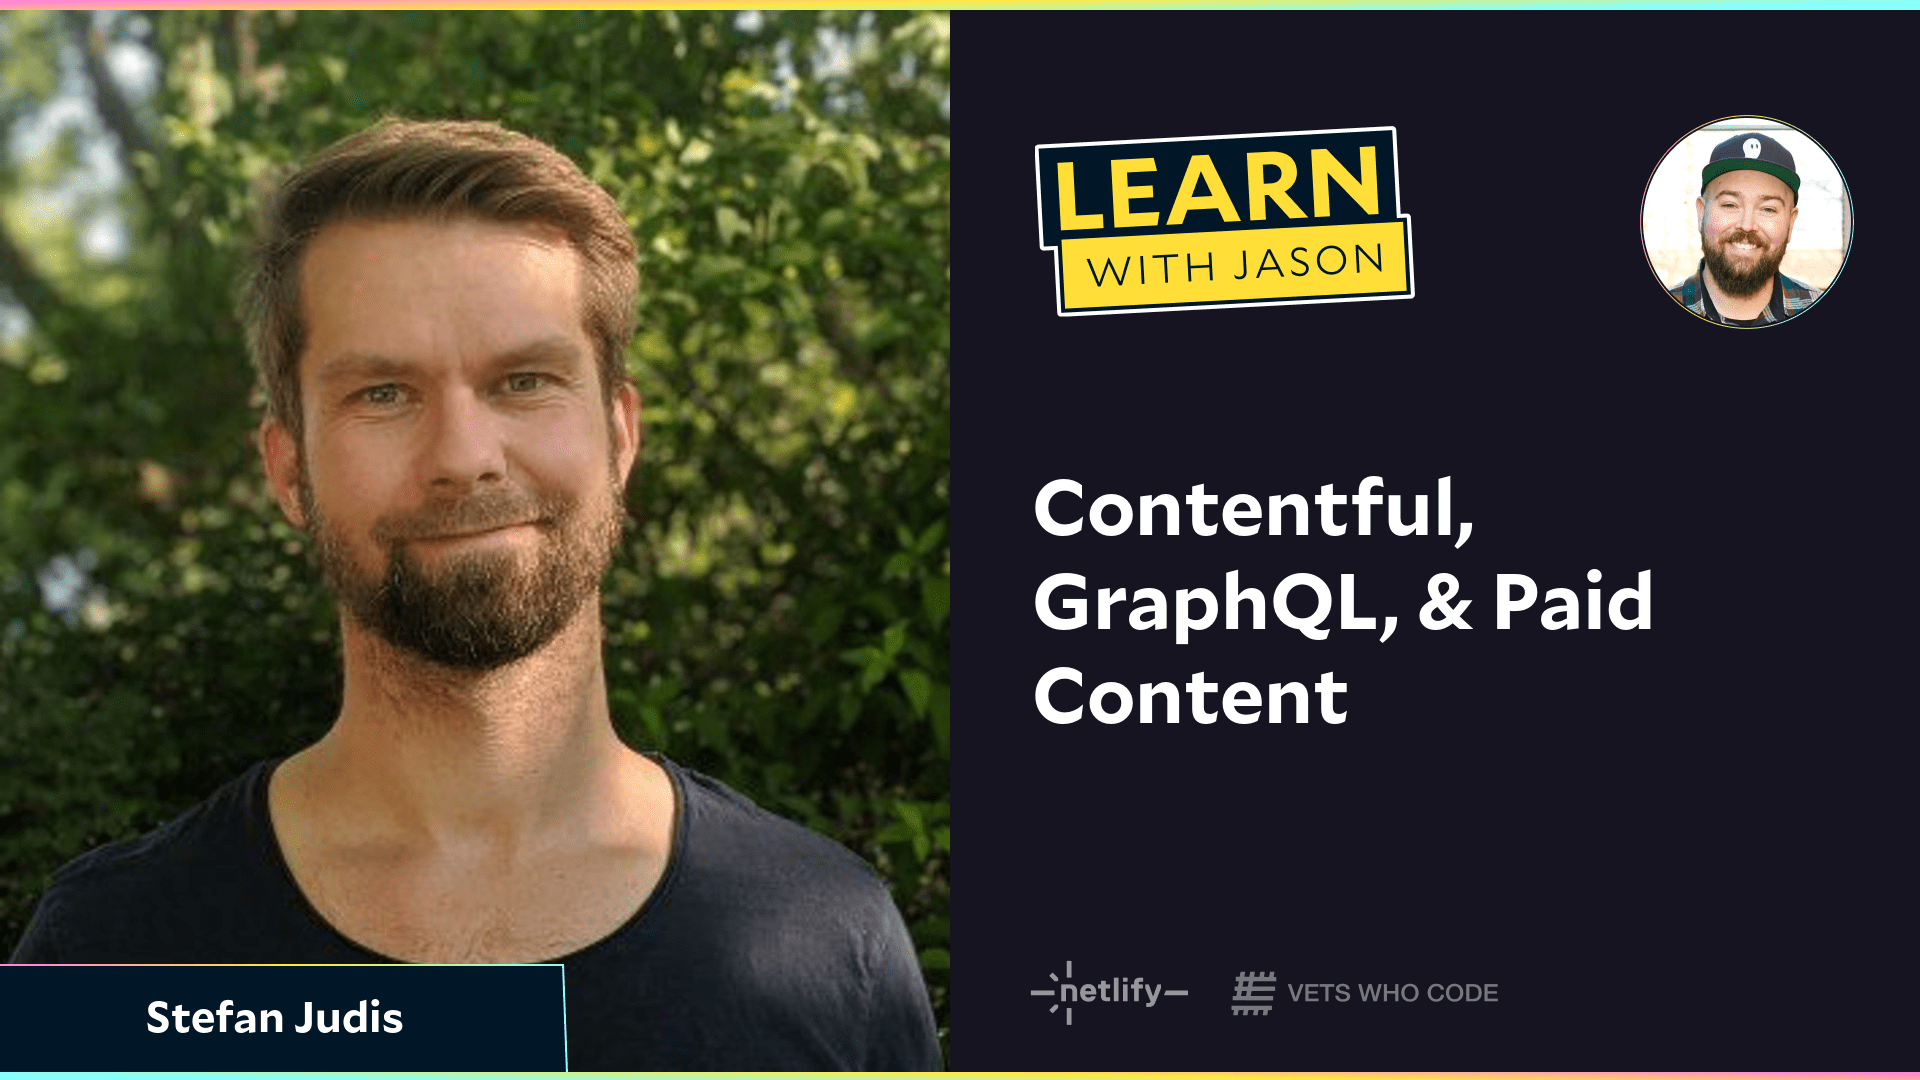 Contentful, GraphQL, & Paid Content  (with Stefan Judis)